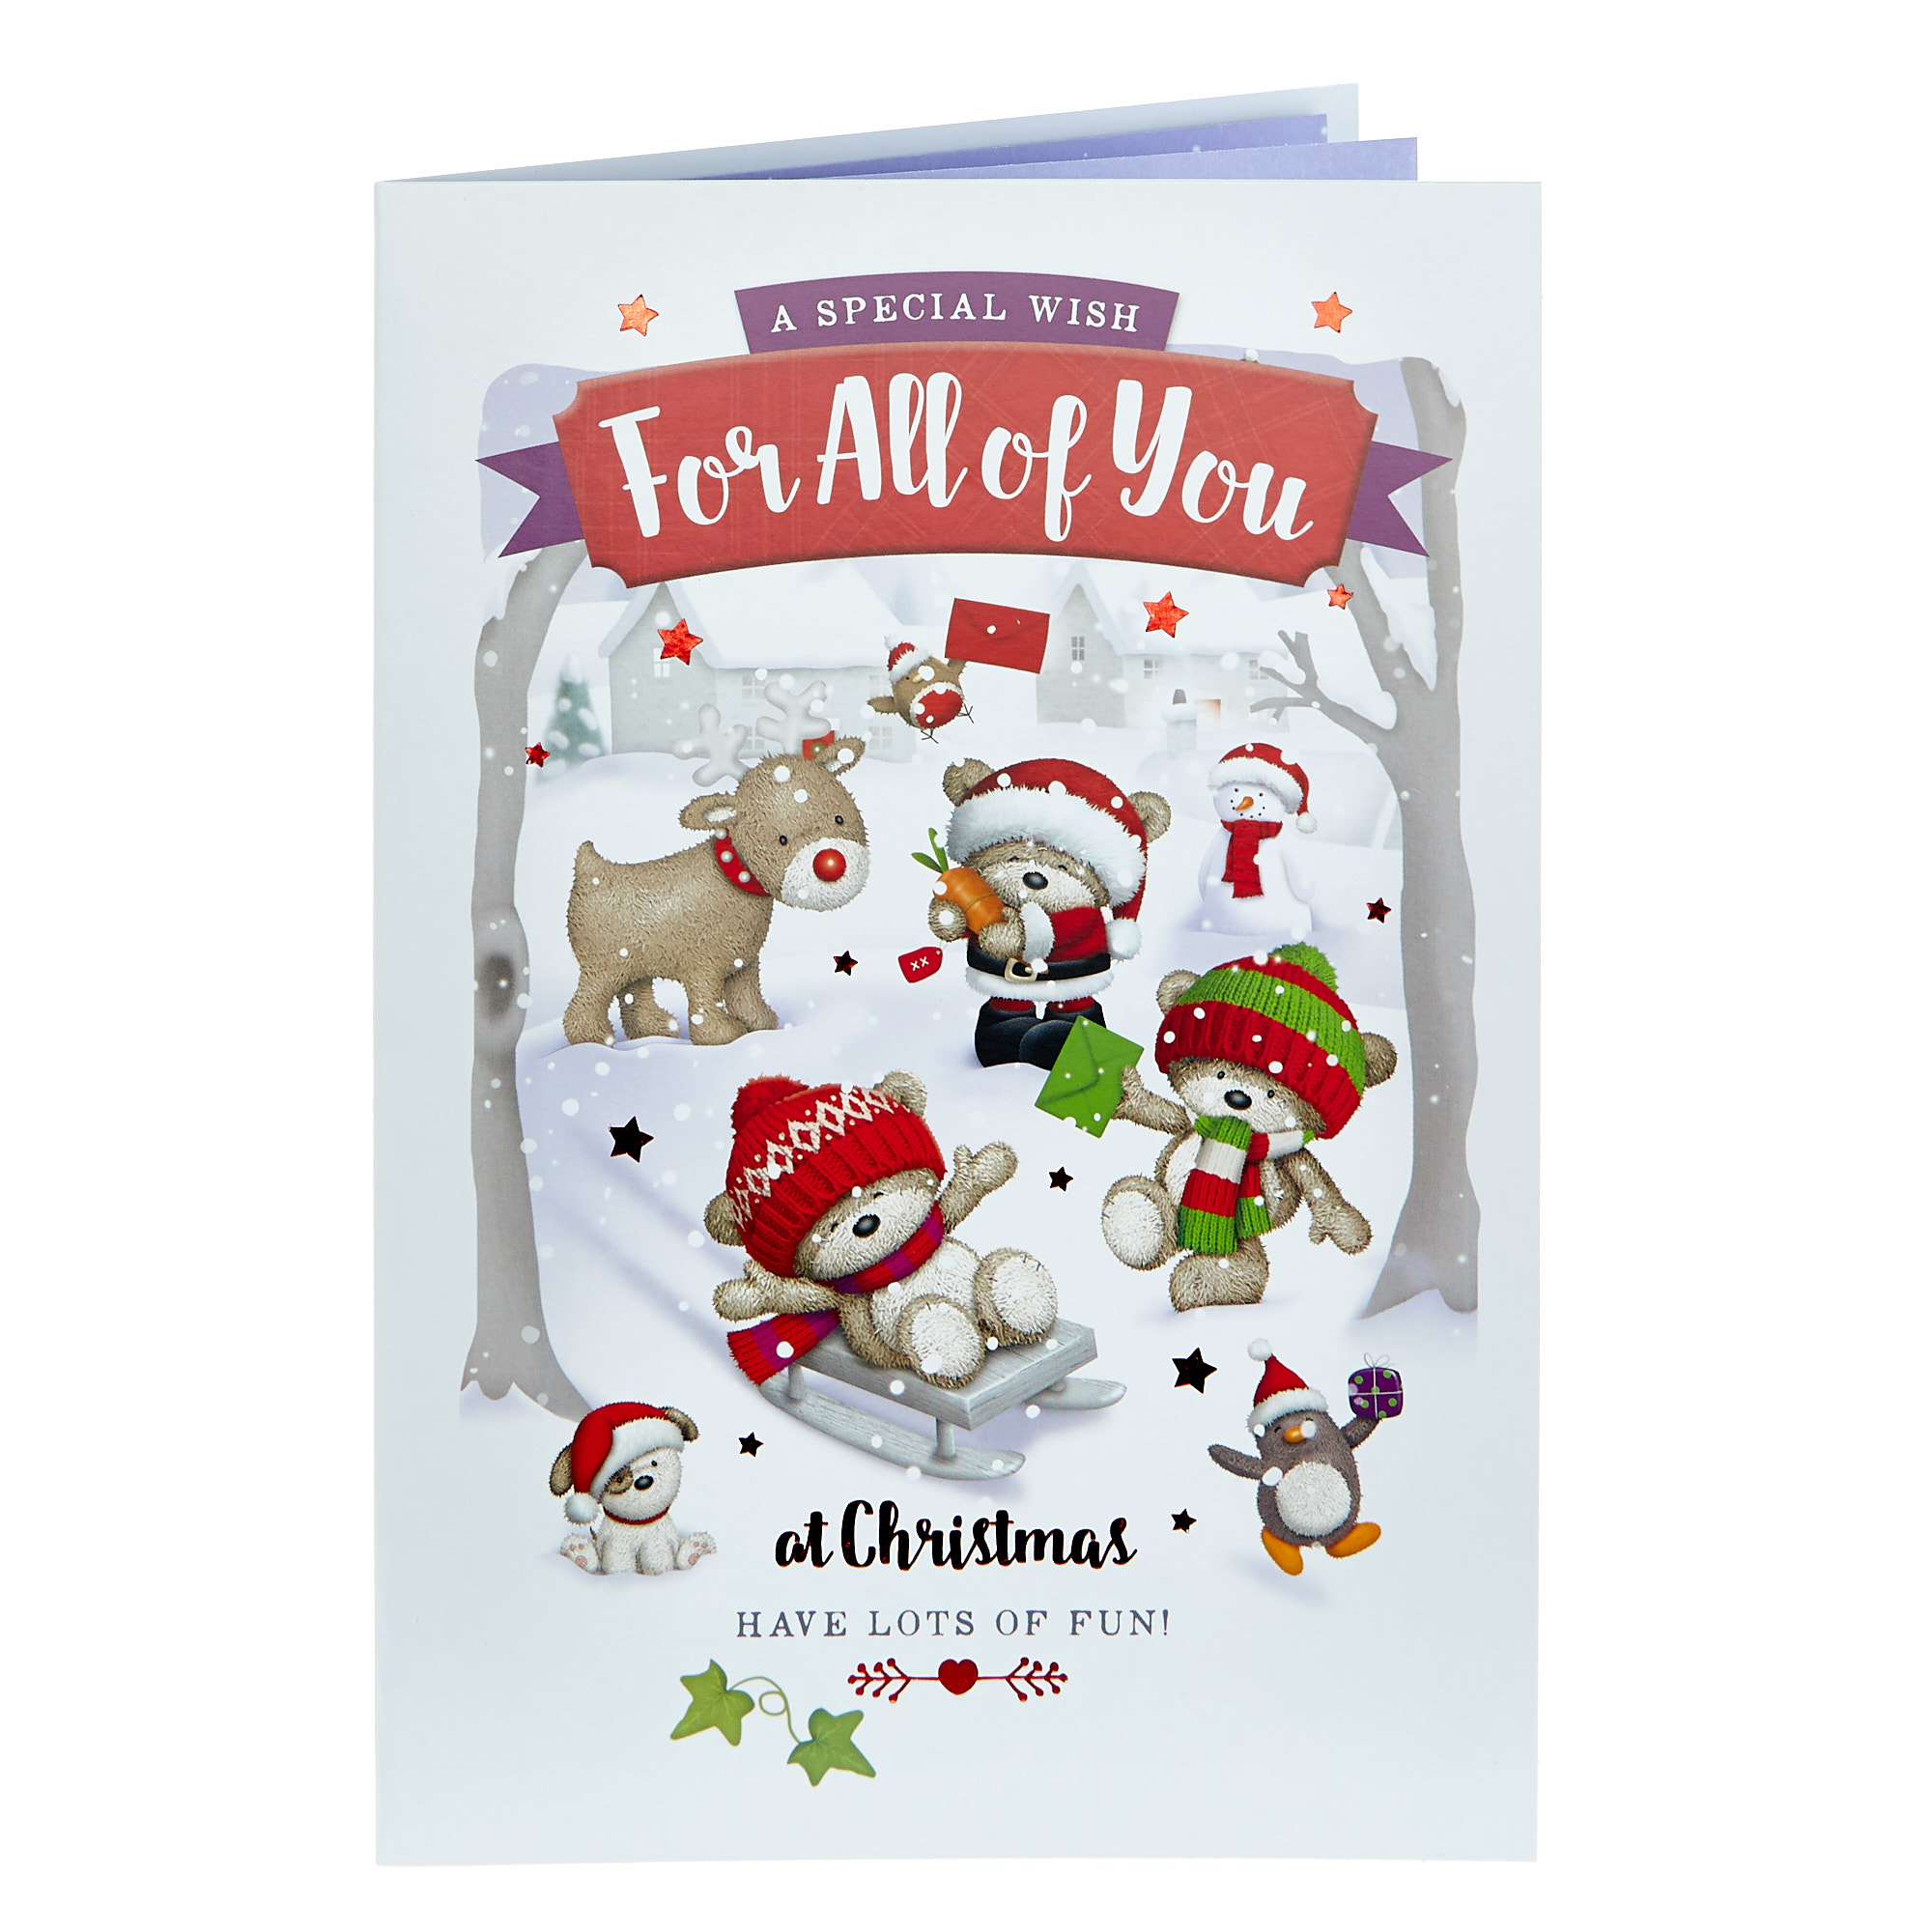 Hugs Bear Christmas Card - For All of You Lots of Fun